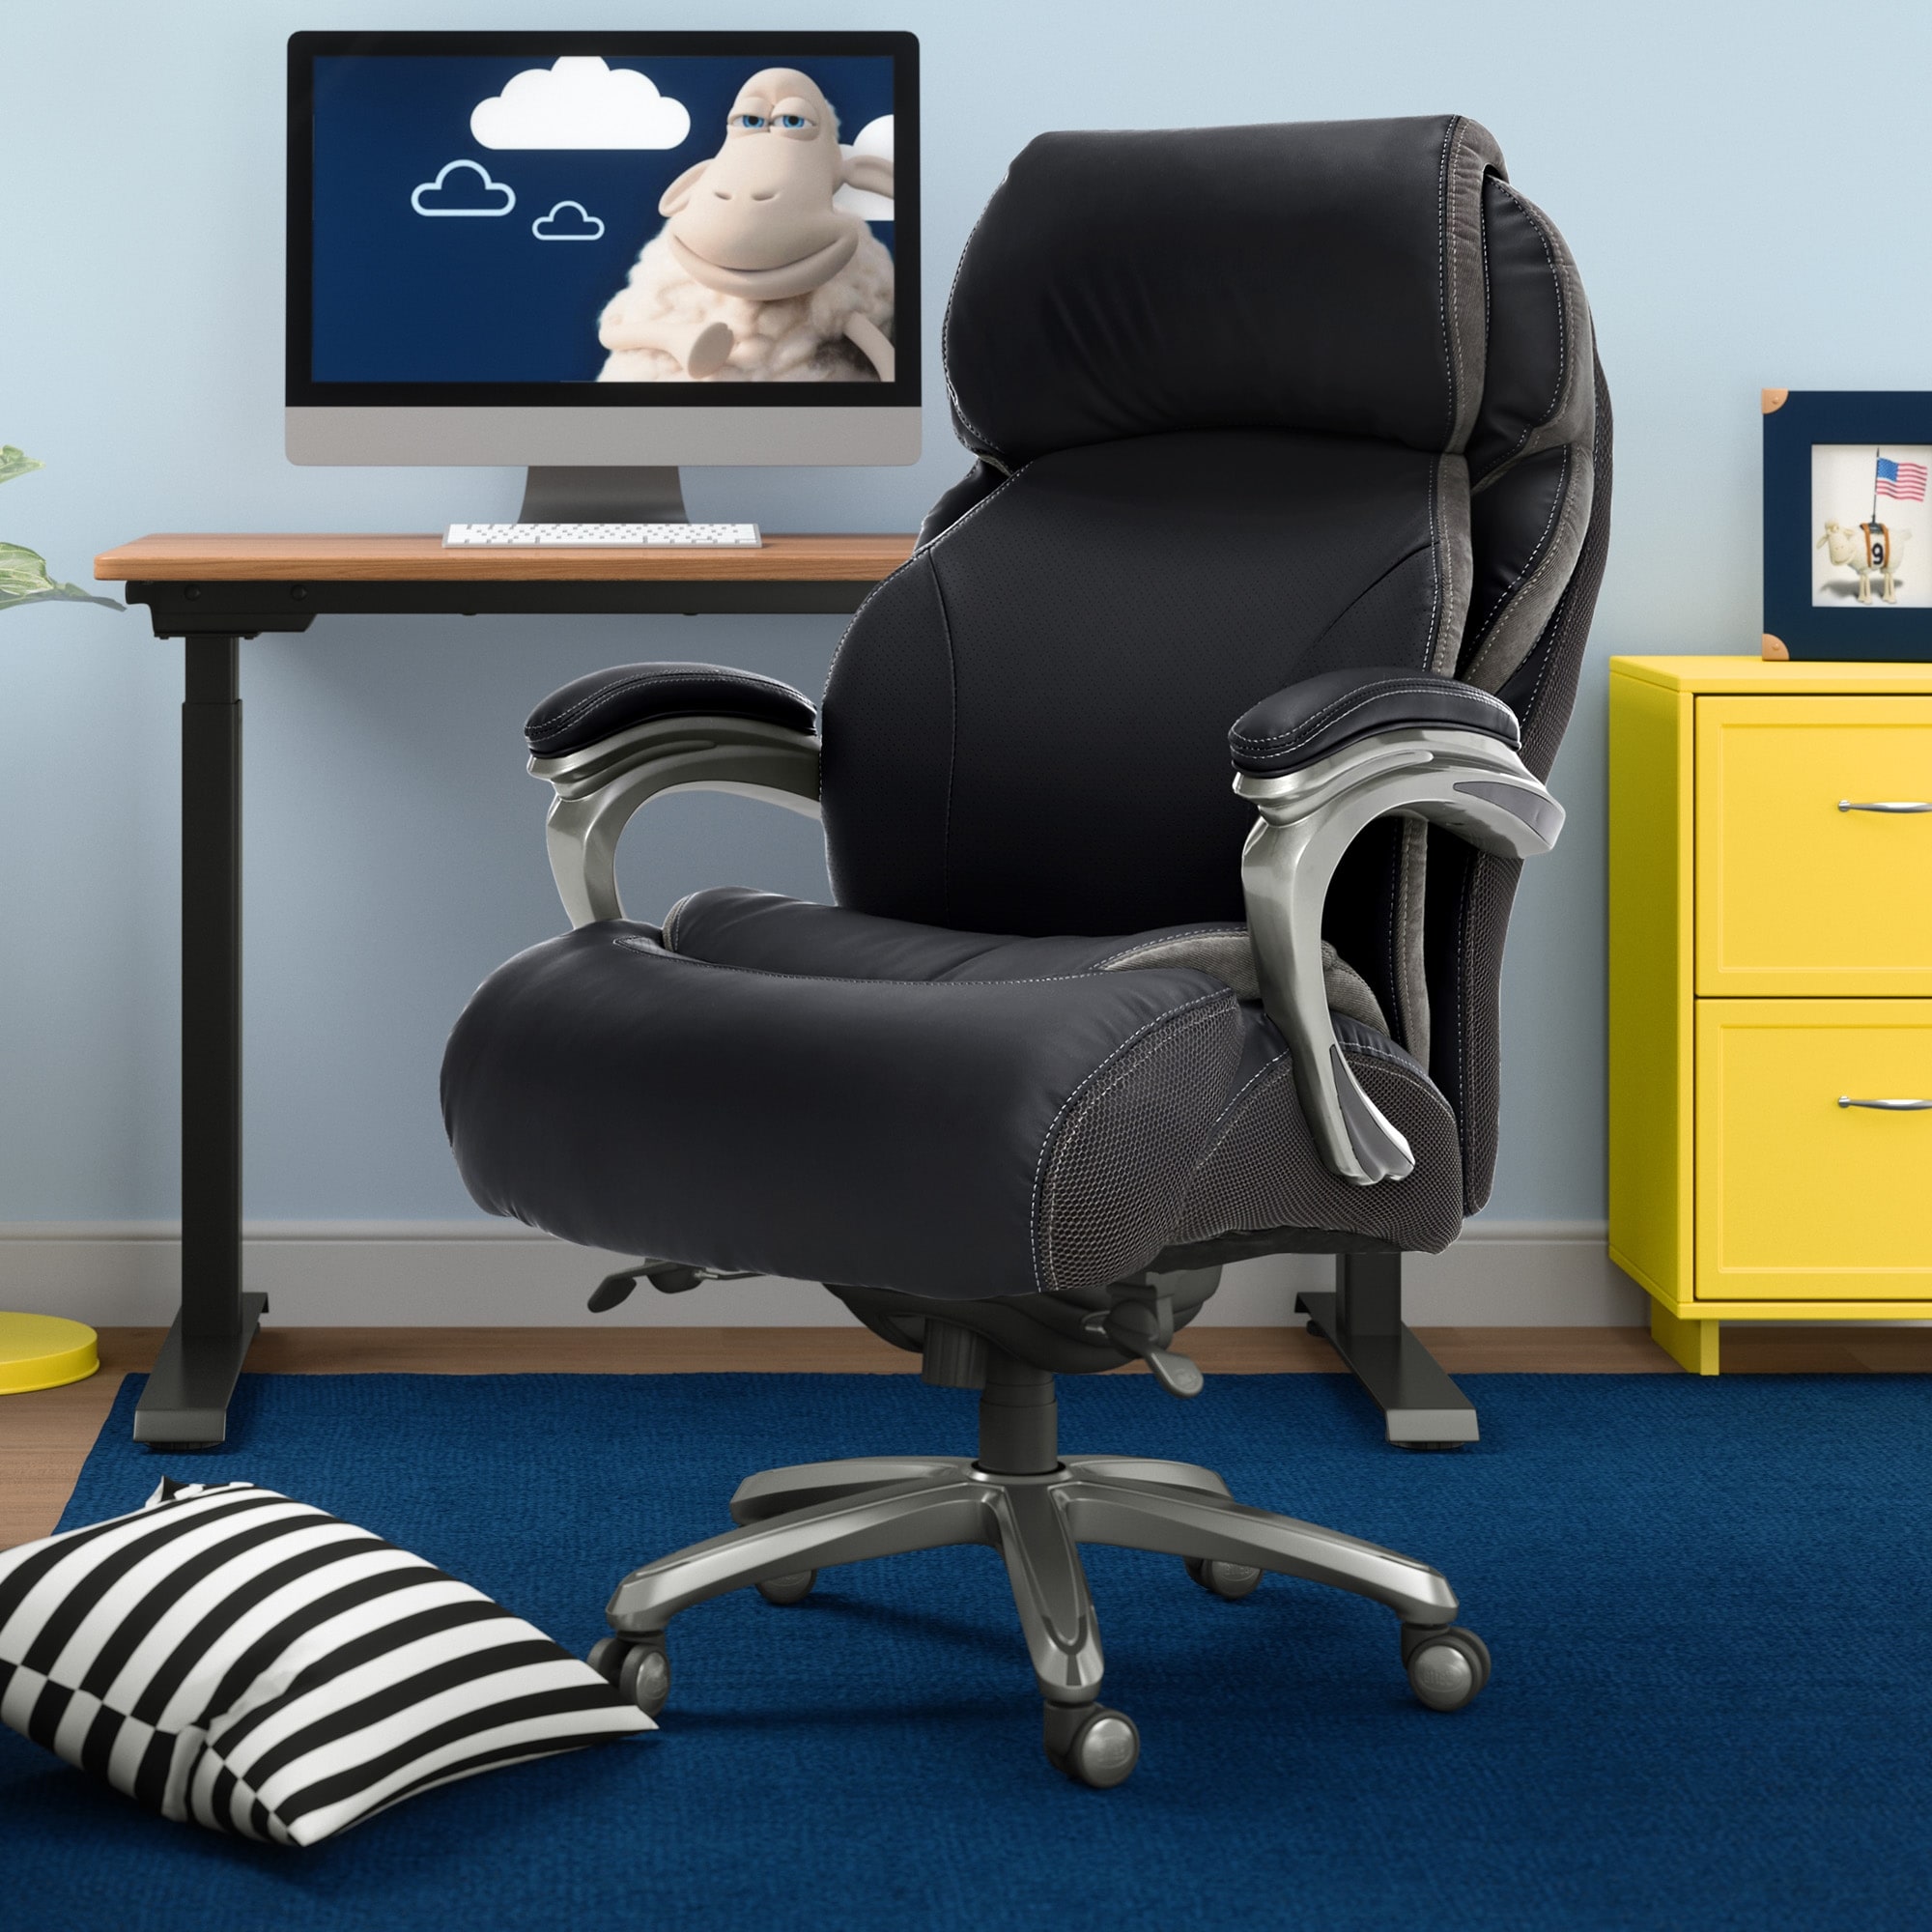 Serta Bryce Executive Office Chair with AIR Lumbar Technology and Layered  Body Pillows - On Sale - Bed Bath & Beyond - 9116644